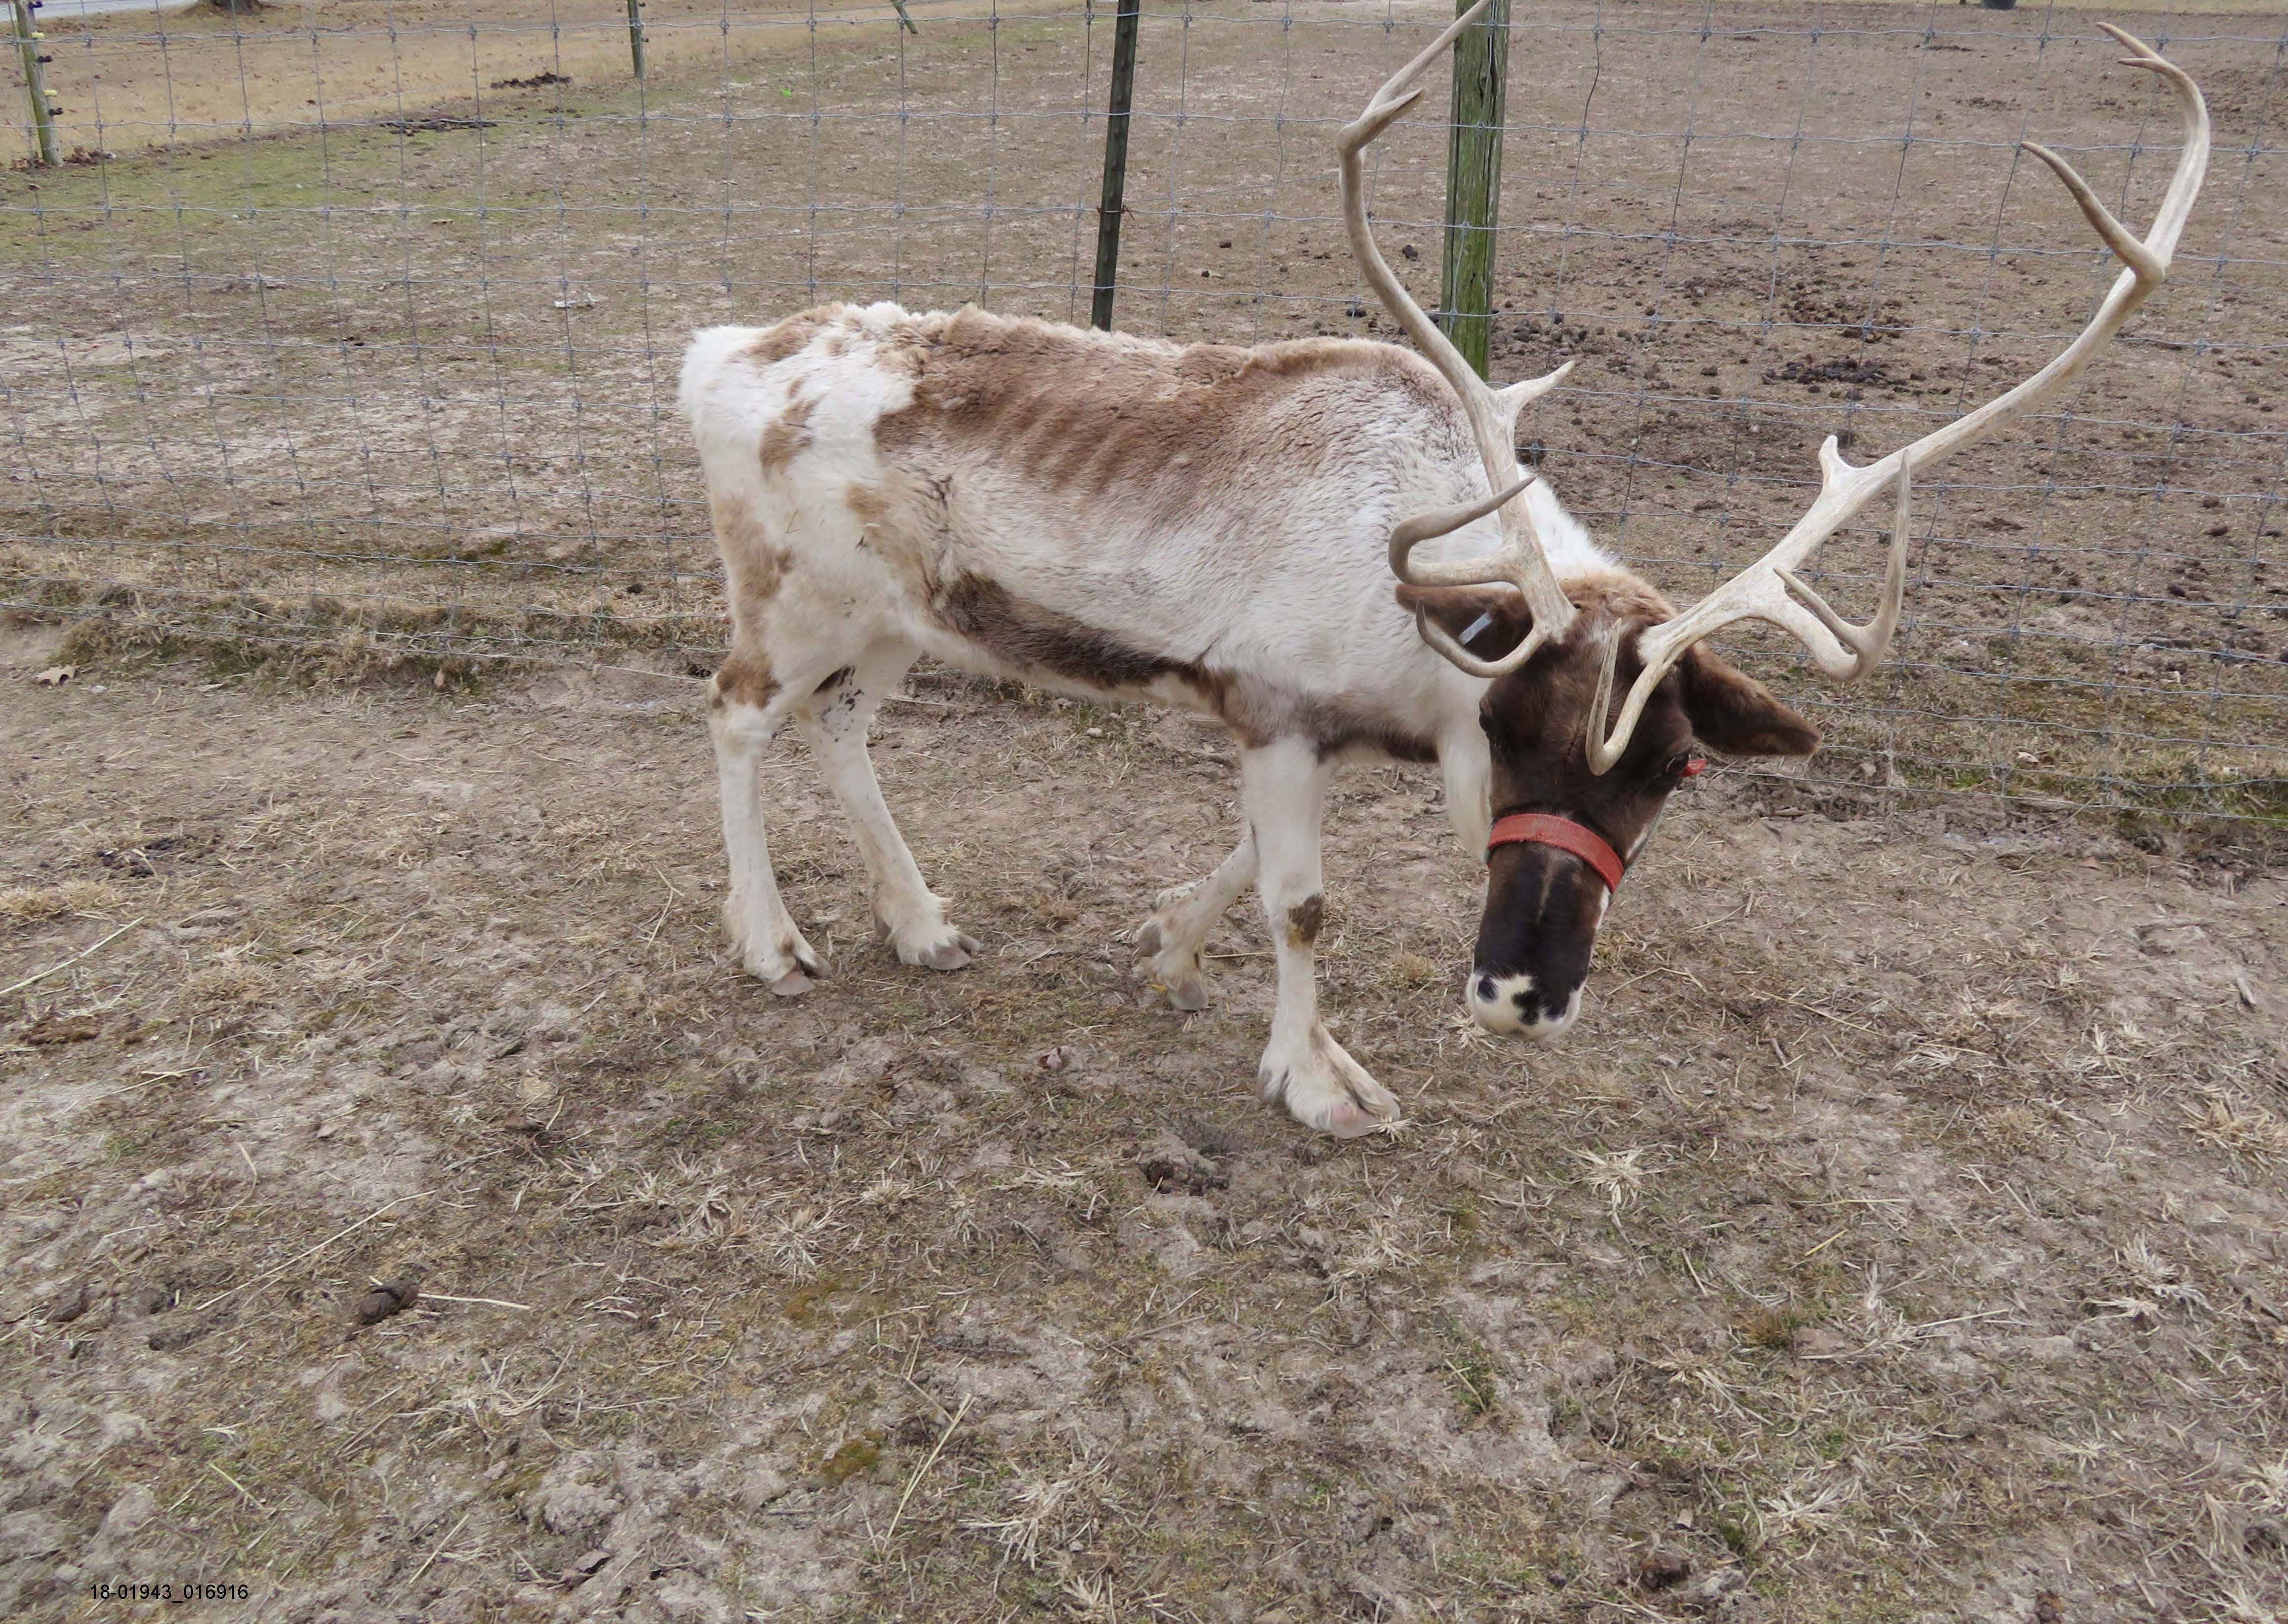 A thin reindeer, who may have been used for Christmas events